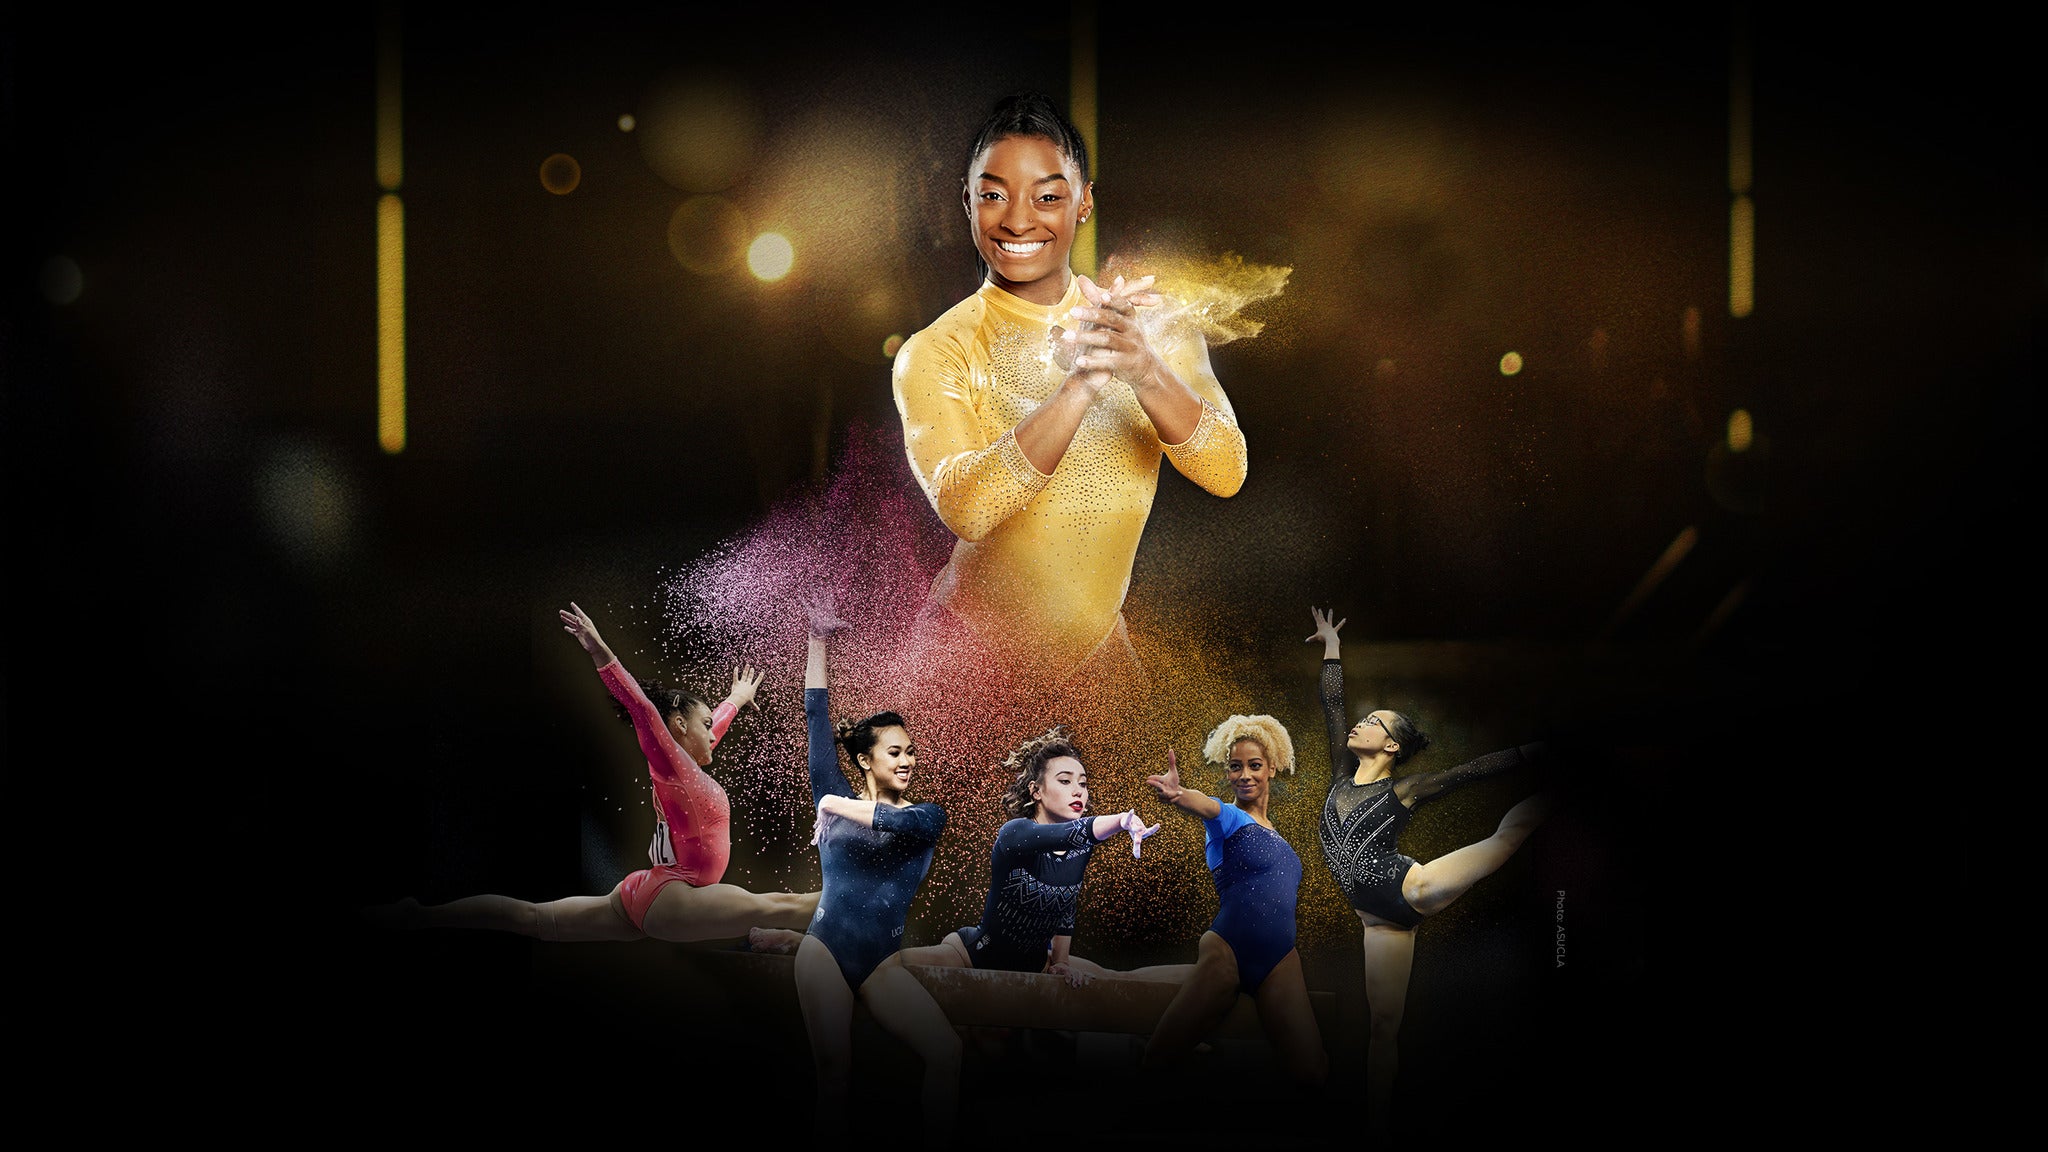 G.O.A.T. Gold Over America Tour Starring Simone Biles in North Little Rock promo photo for G.o.a.t. presale offer code